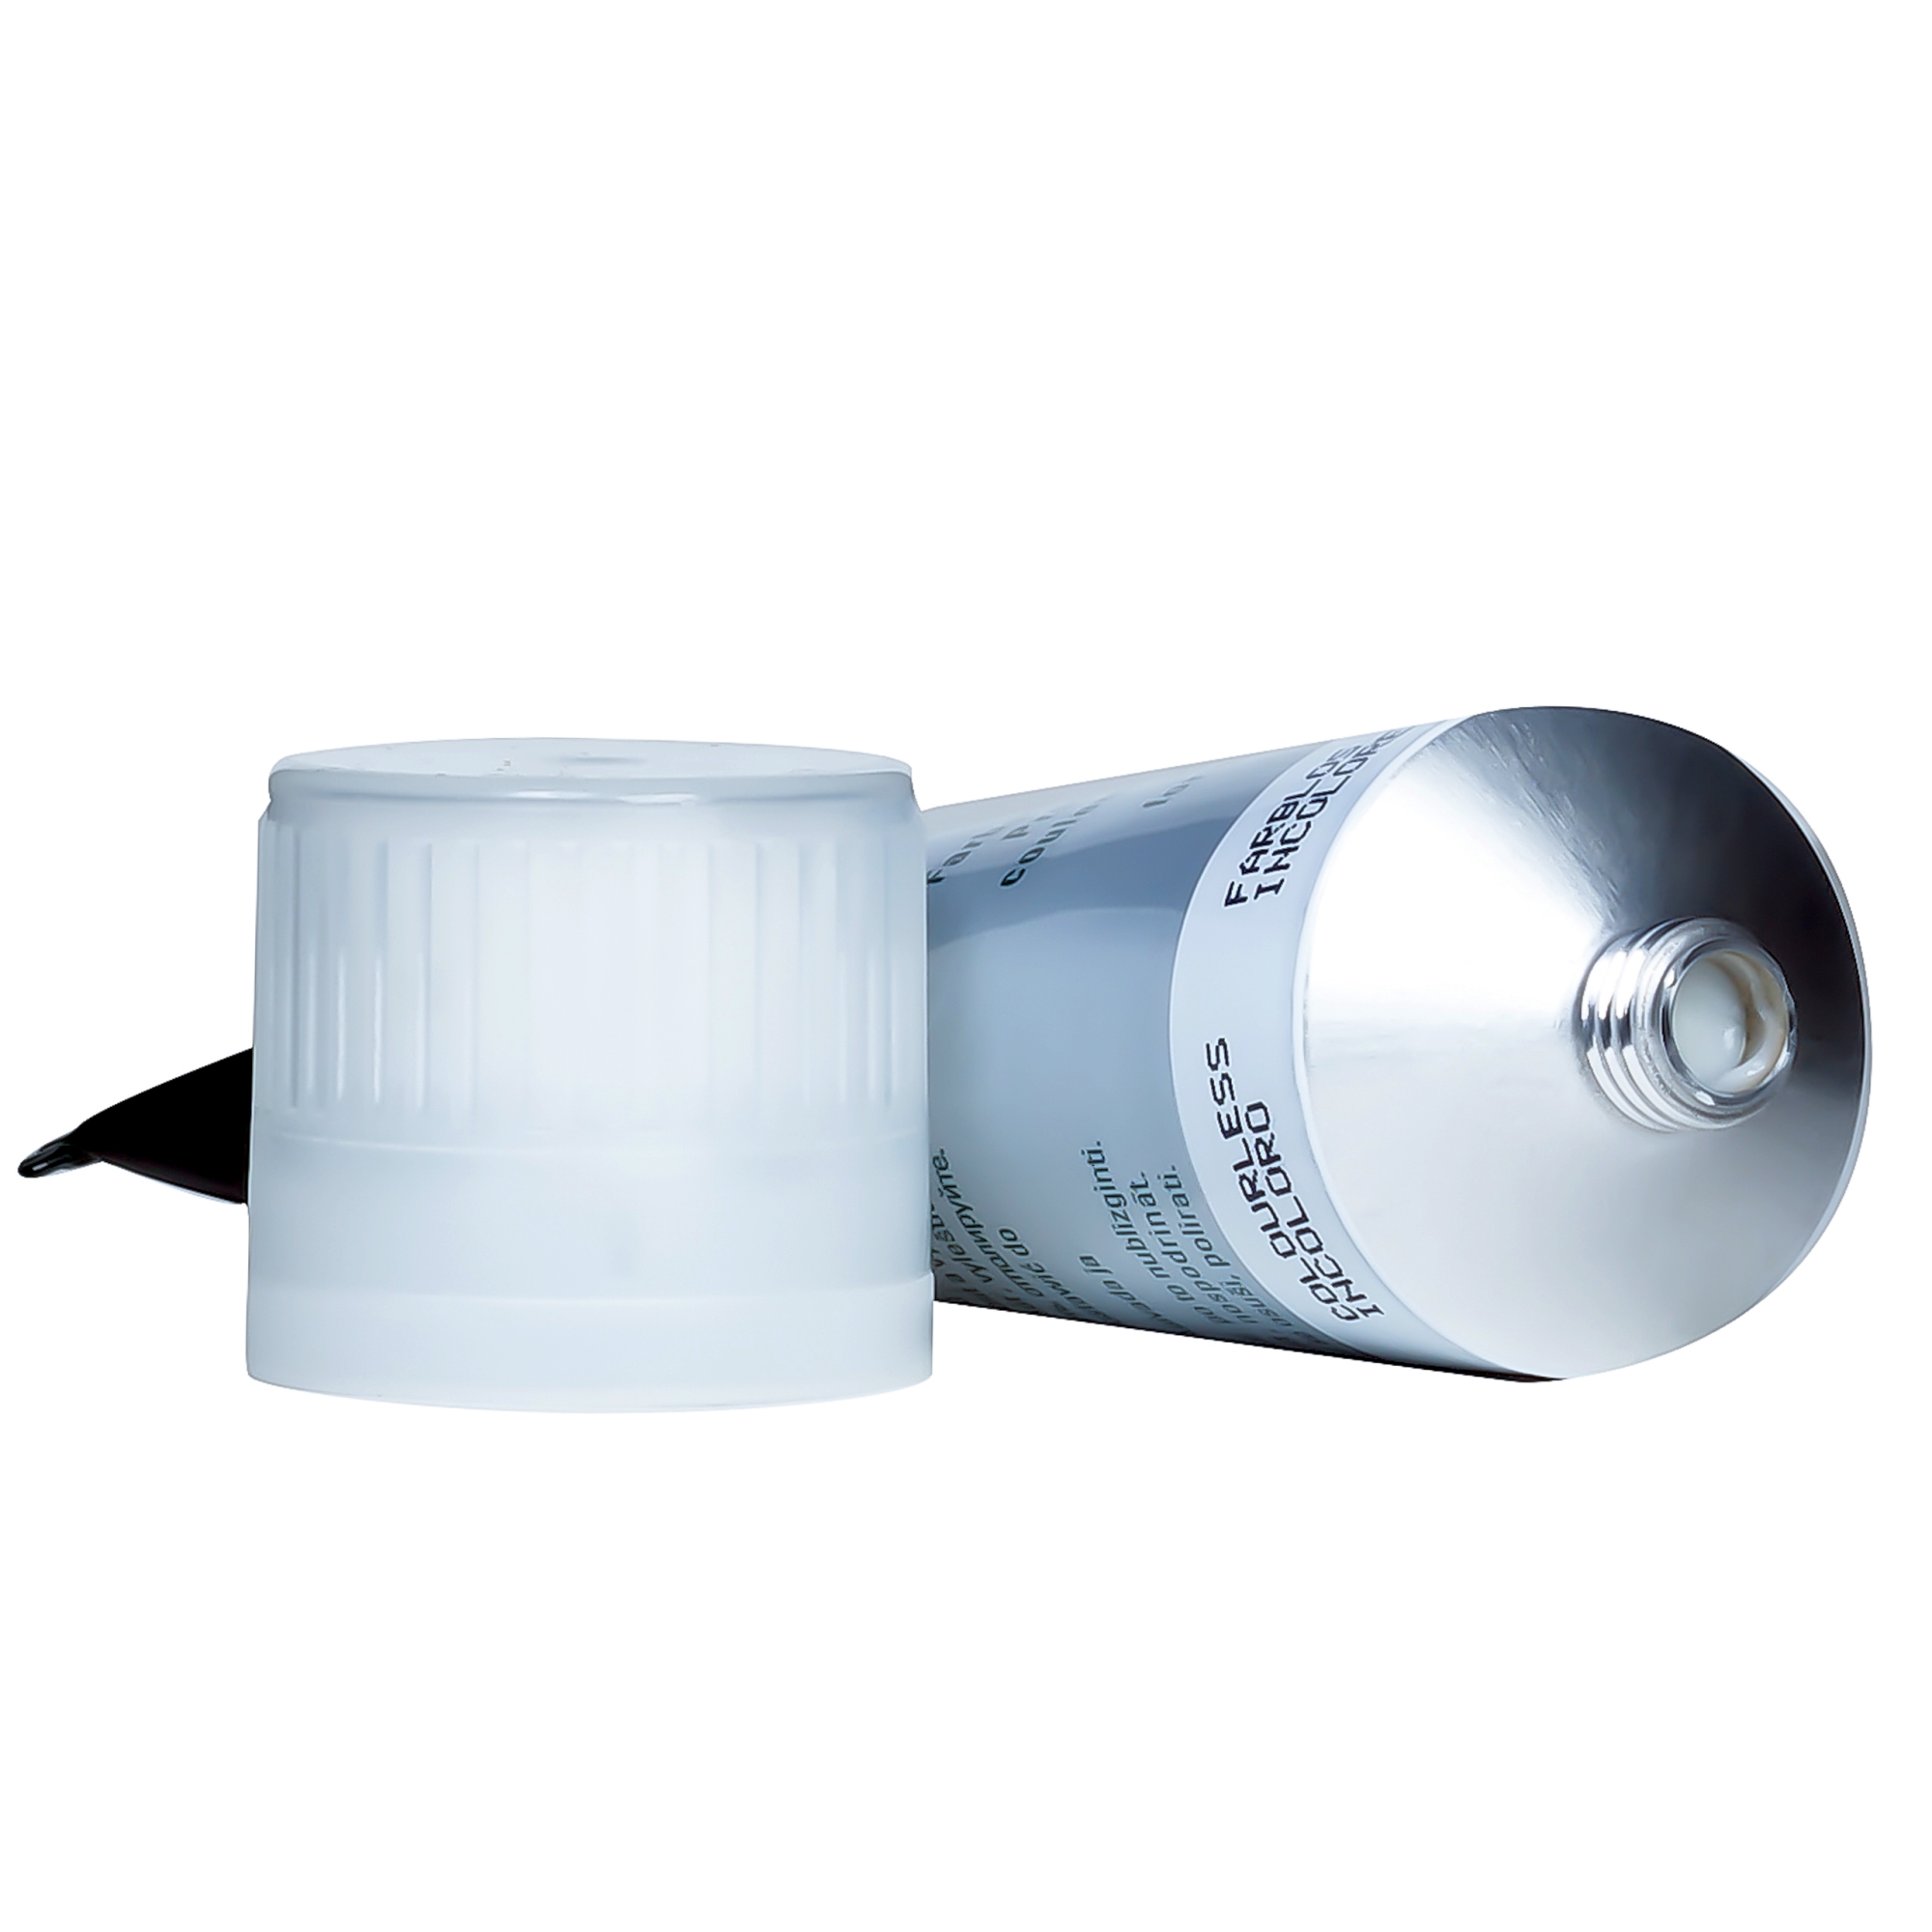 Collonil Waterstop Tube 050 Neutral